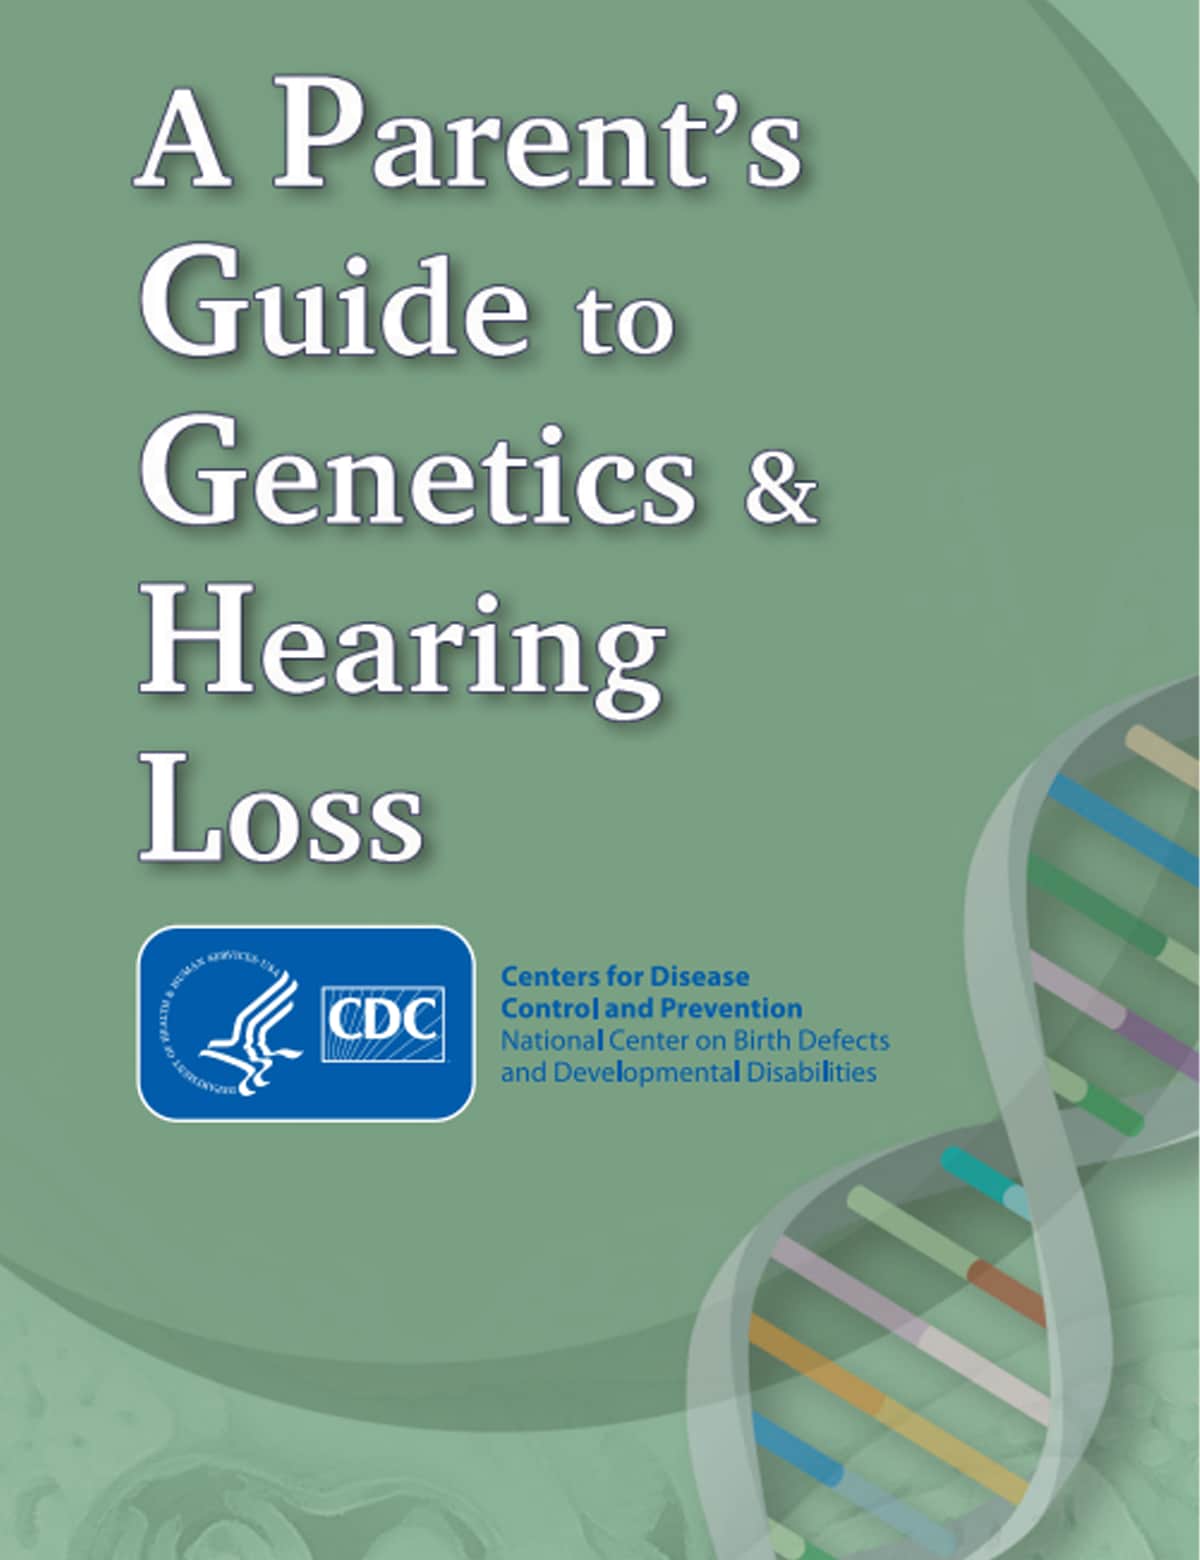 PDF preview - a parent's guide to genetics and hearing loss